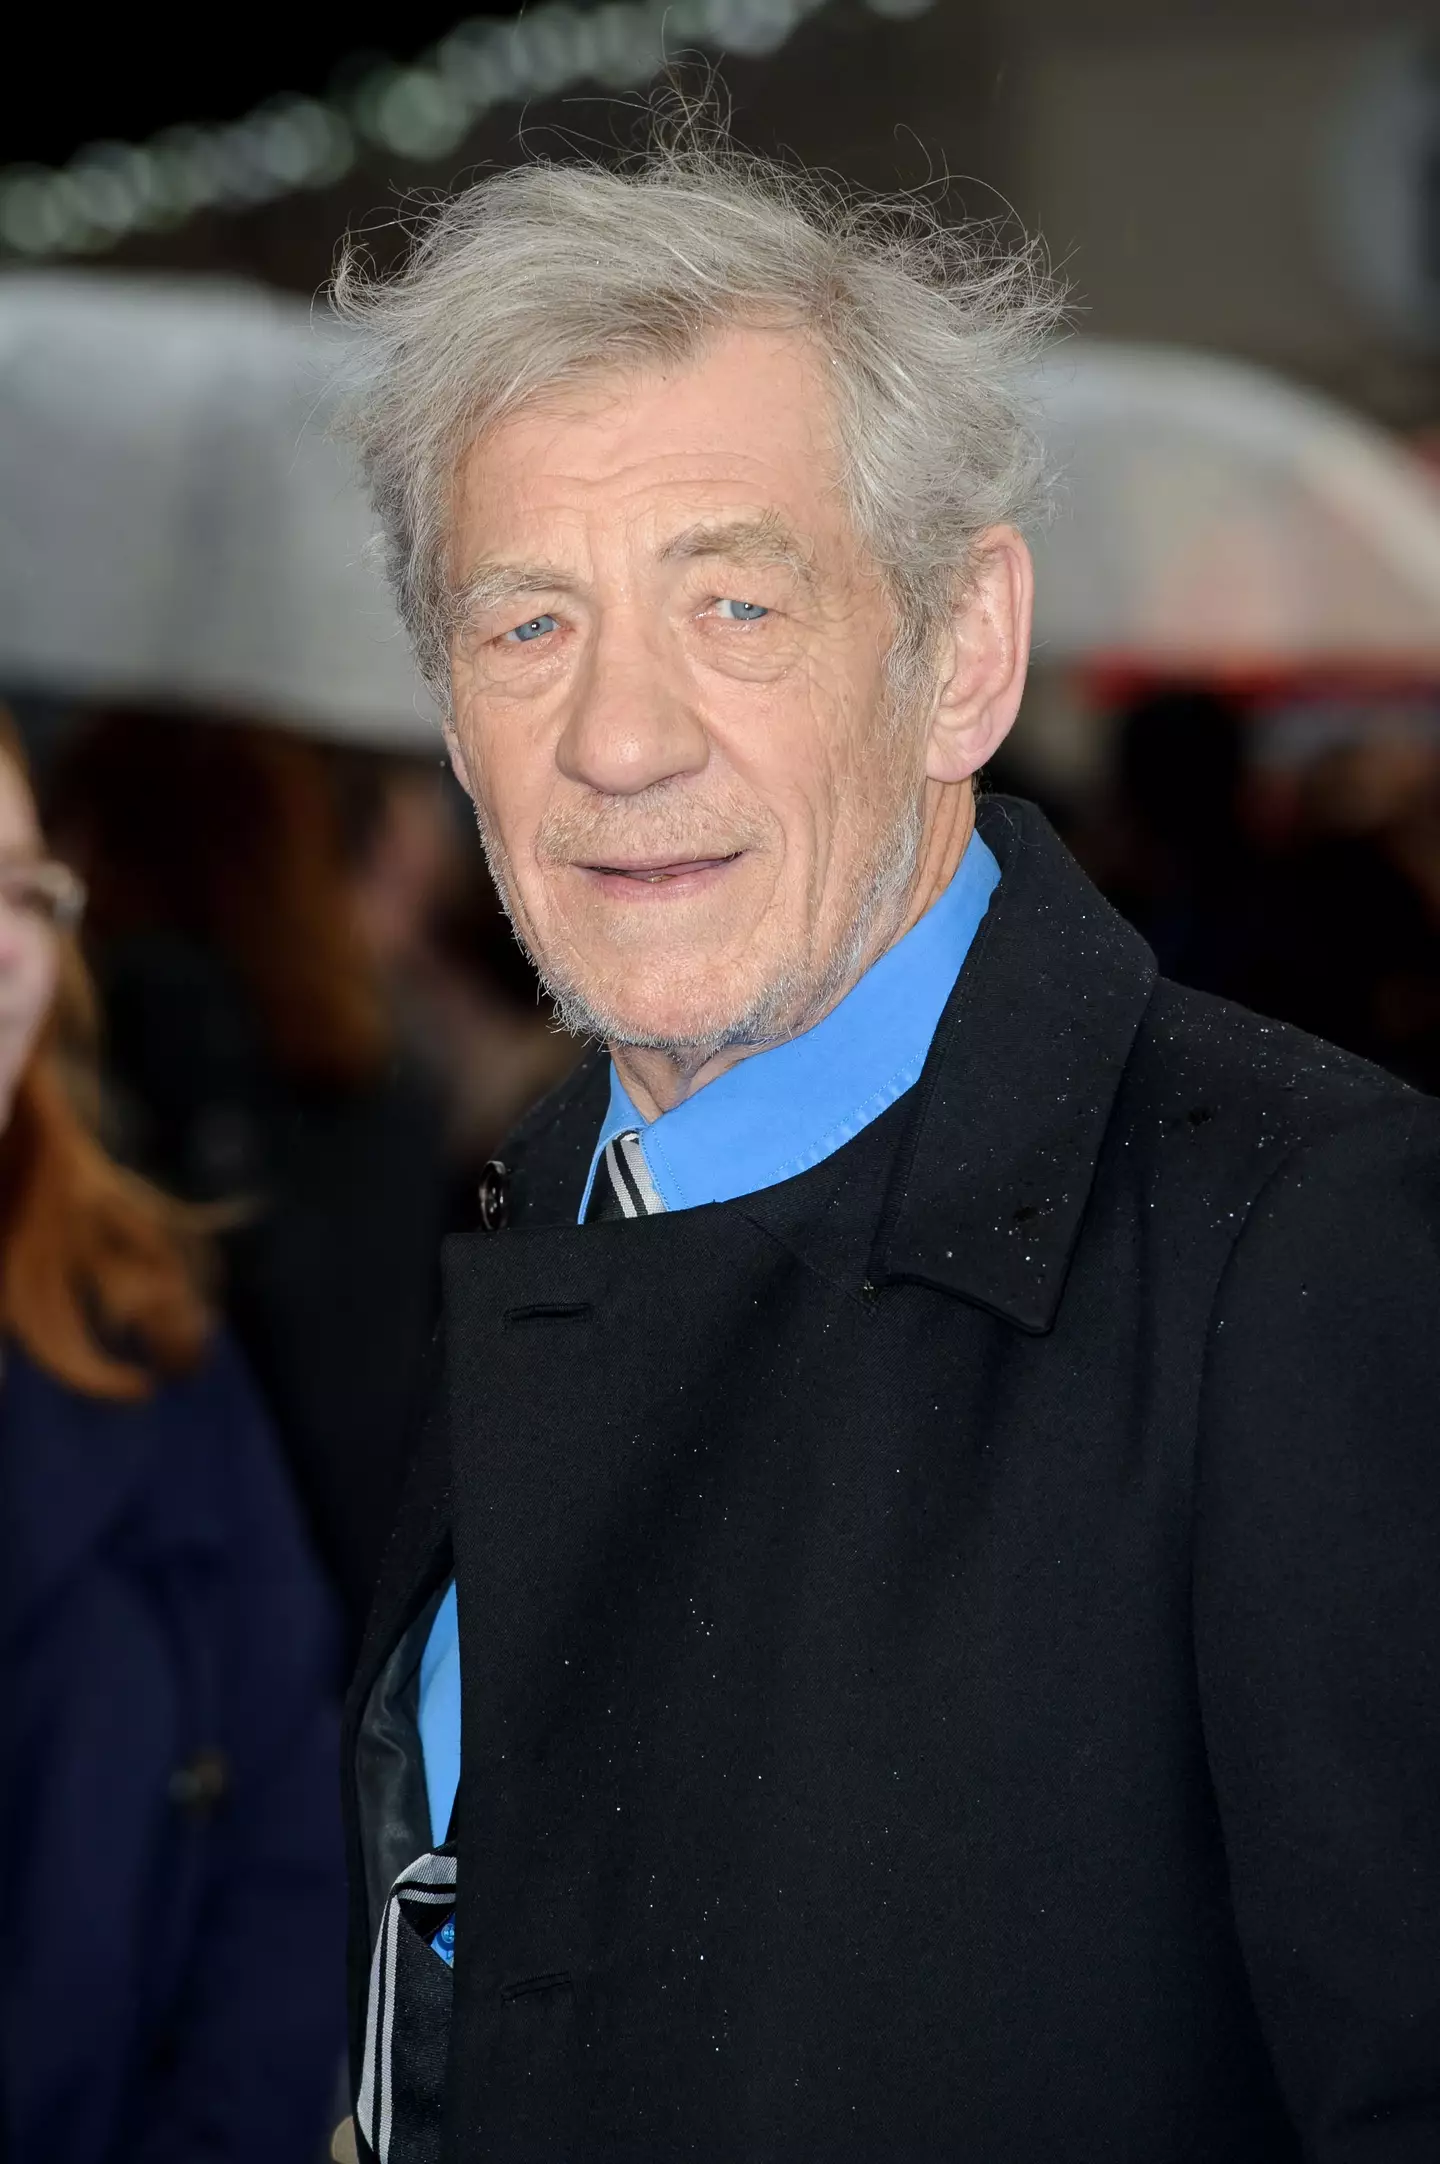 Sir Ian McKellen revealed why he decided to turn down the role of Dumbledore in Harry Potter.